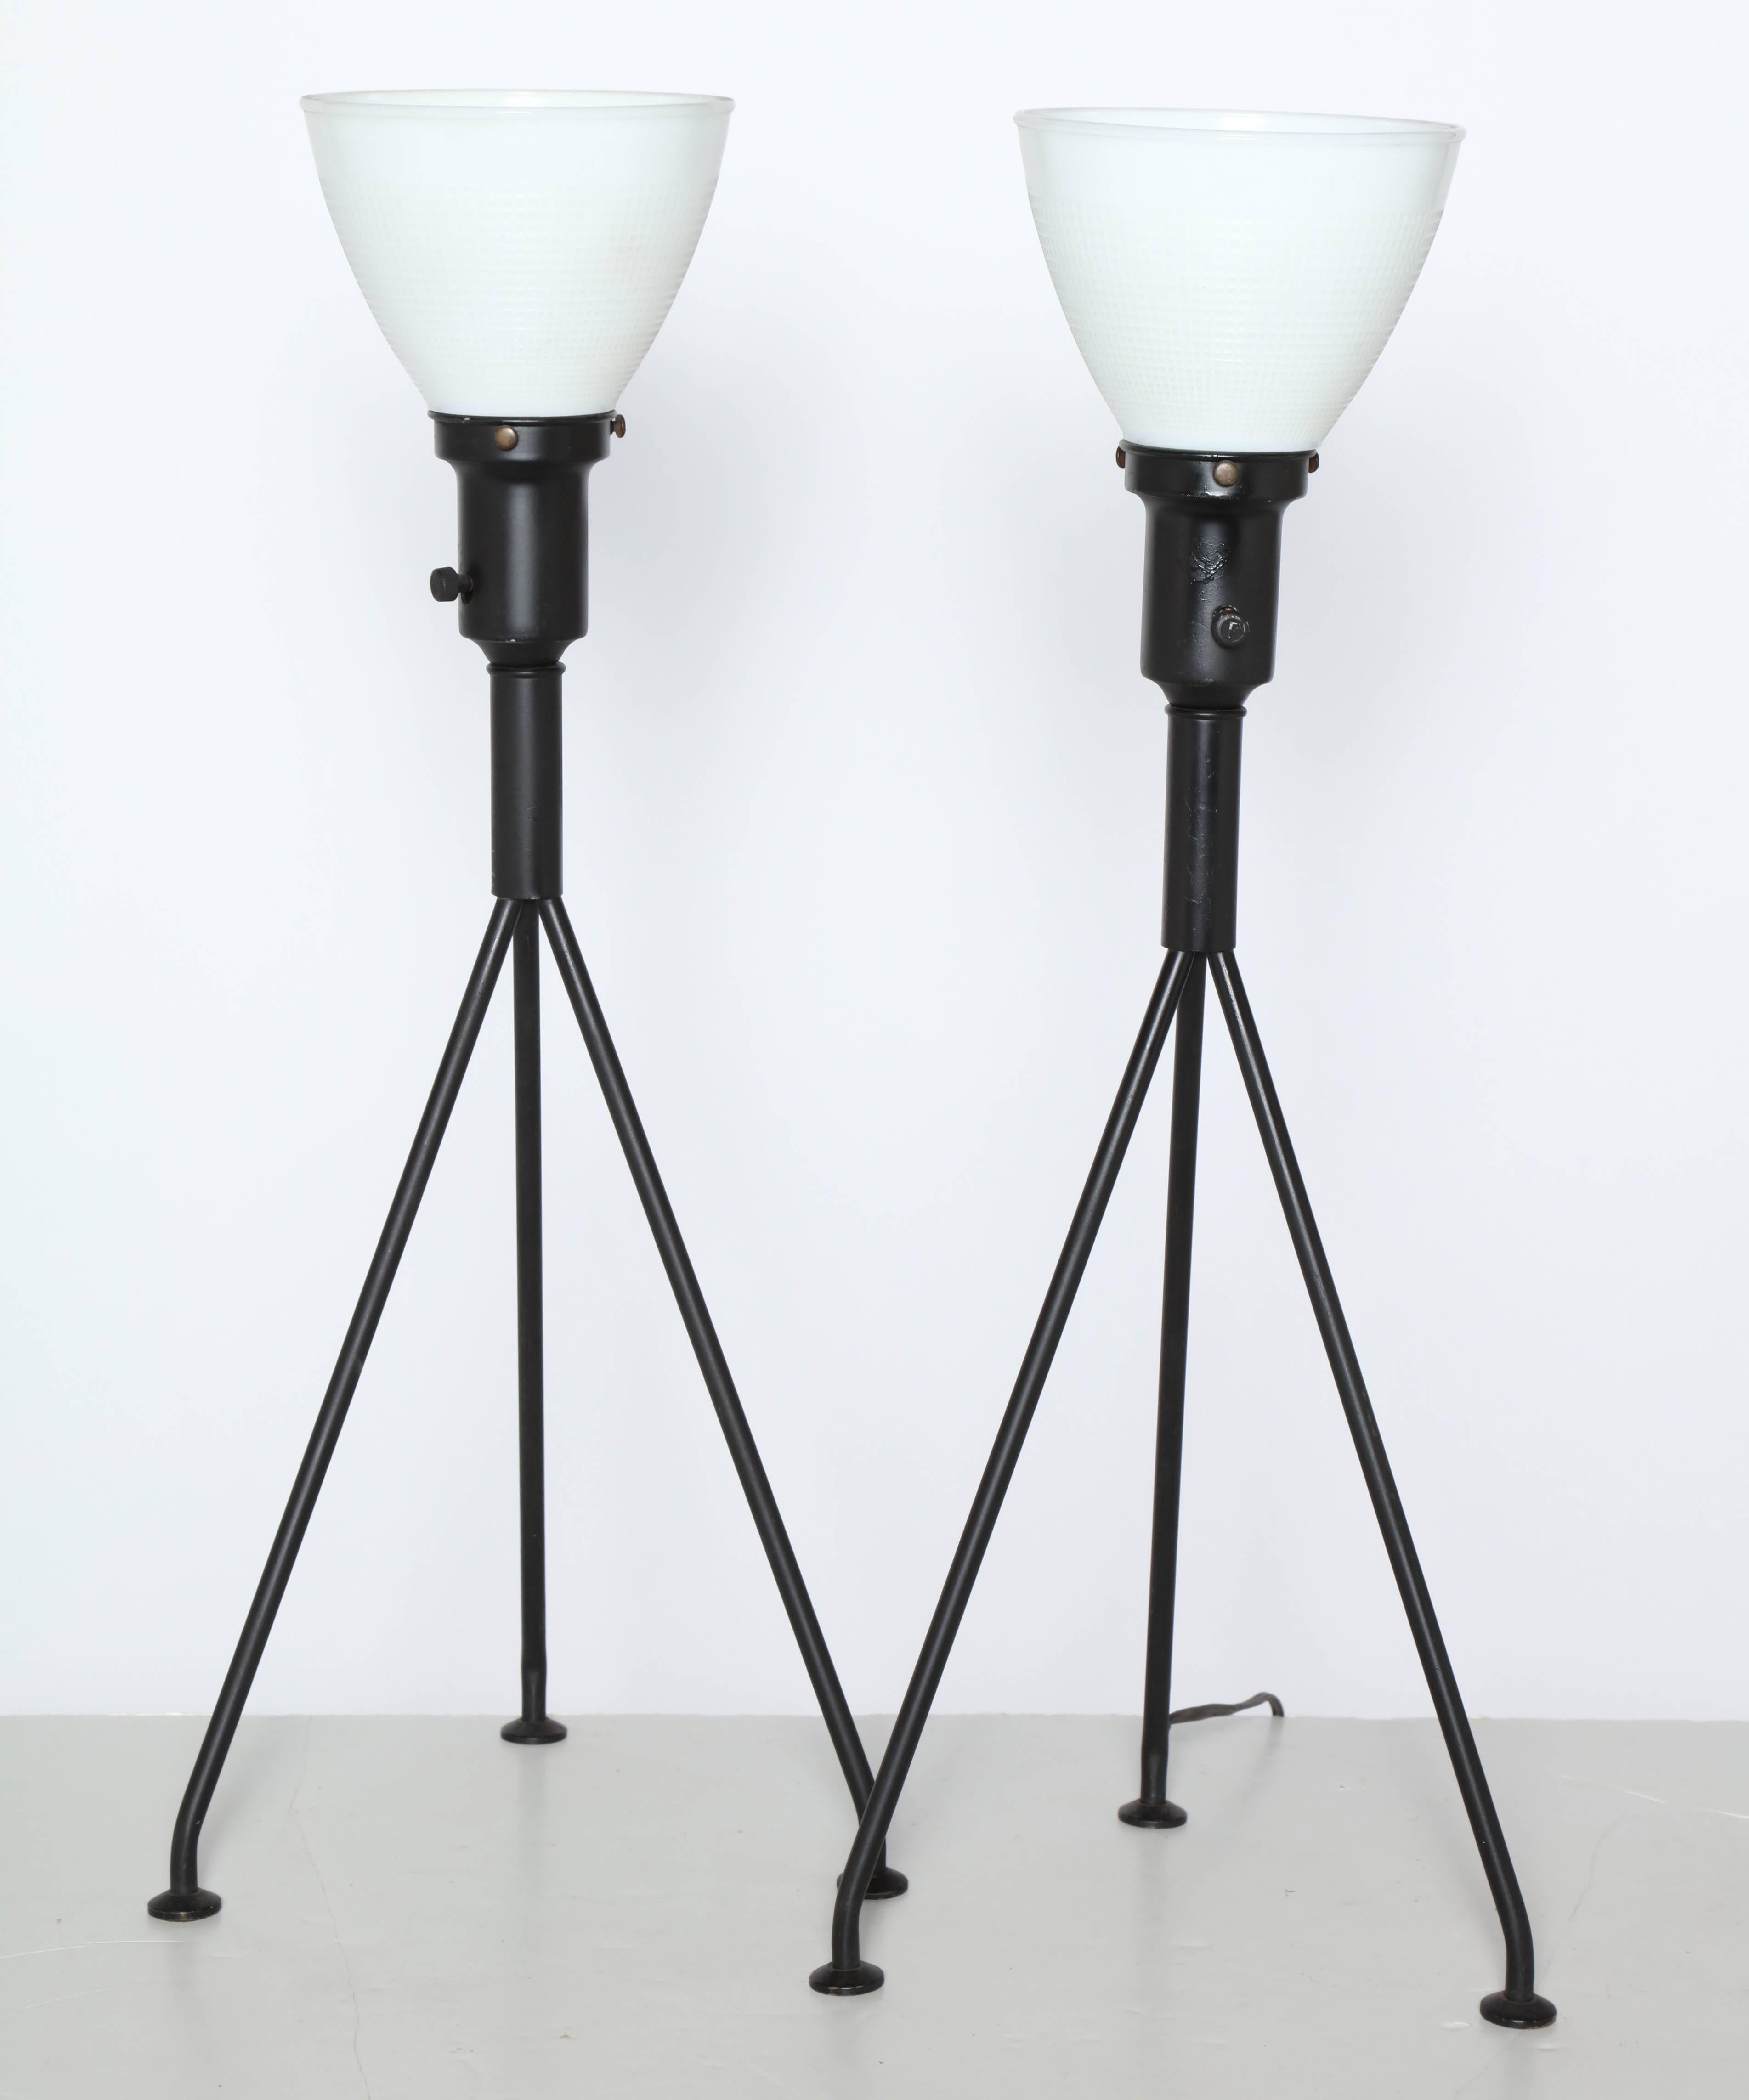 Pair of 1950's Gerald Thurston for Lightolier Black and White Table Lamps. Featuring Black enameled Steel tripod legs, socket and neck.  With White Milk Glass Liner Shades and Brass feet. For use with or without a Lamp Shade. Minimalist. Sculptural.